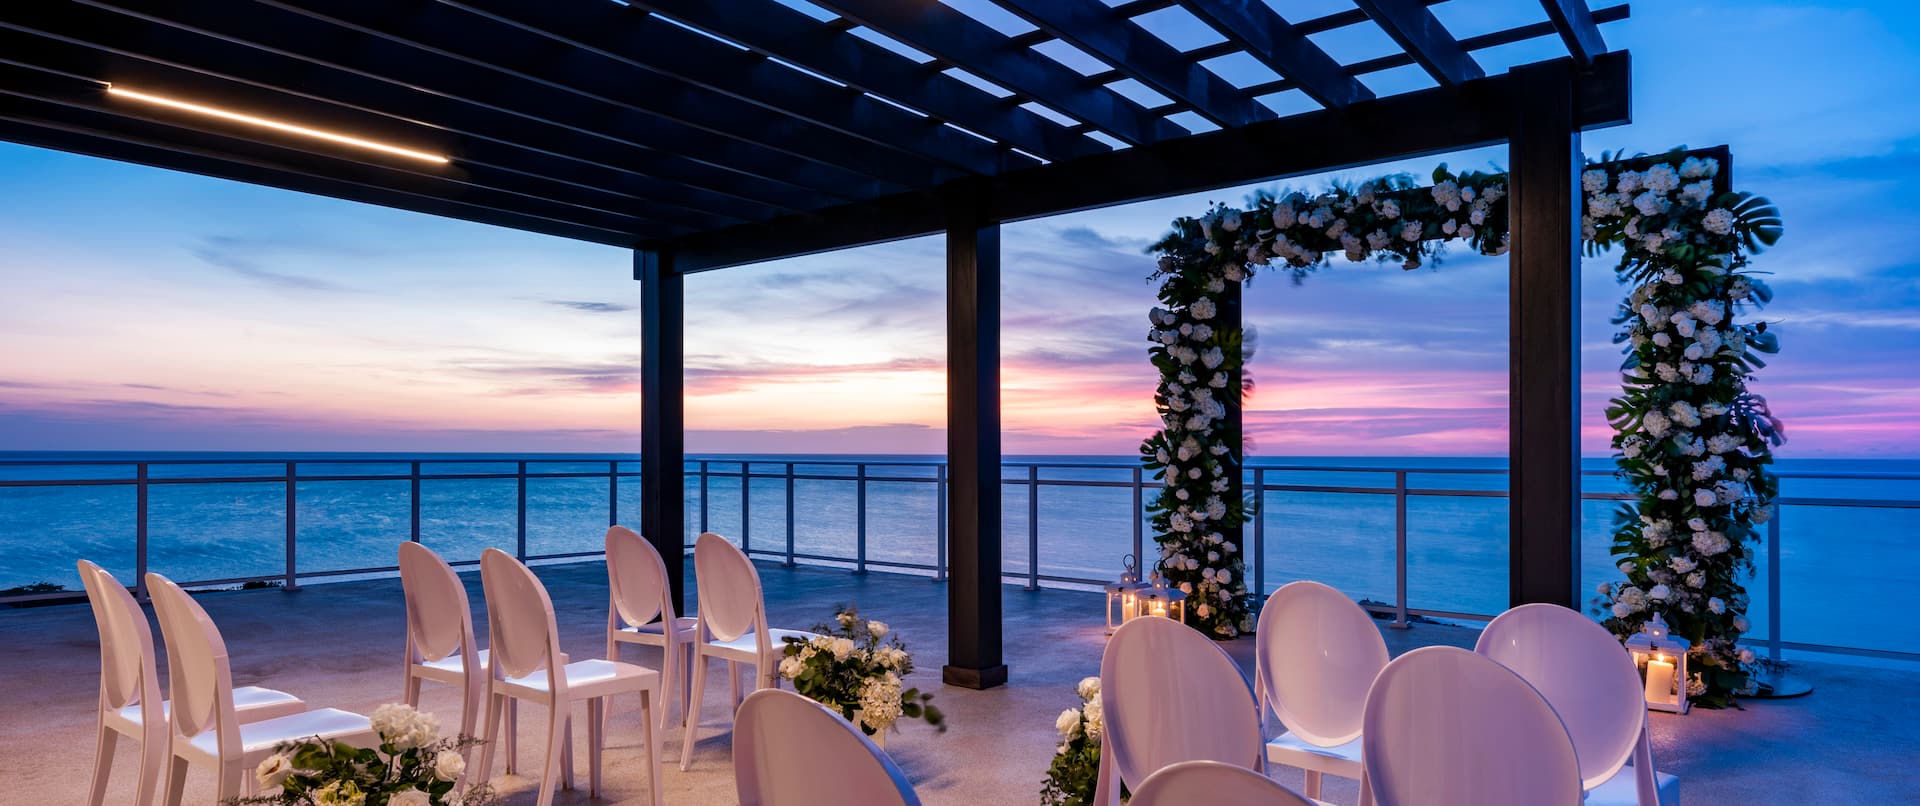 wedding ceremony set up on the terrace overlooking the water